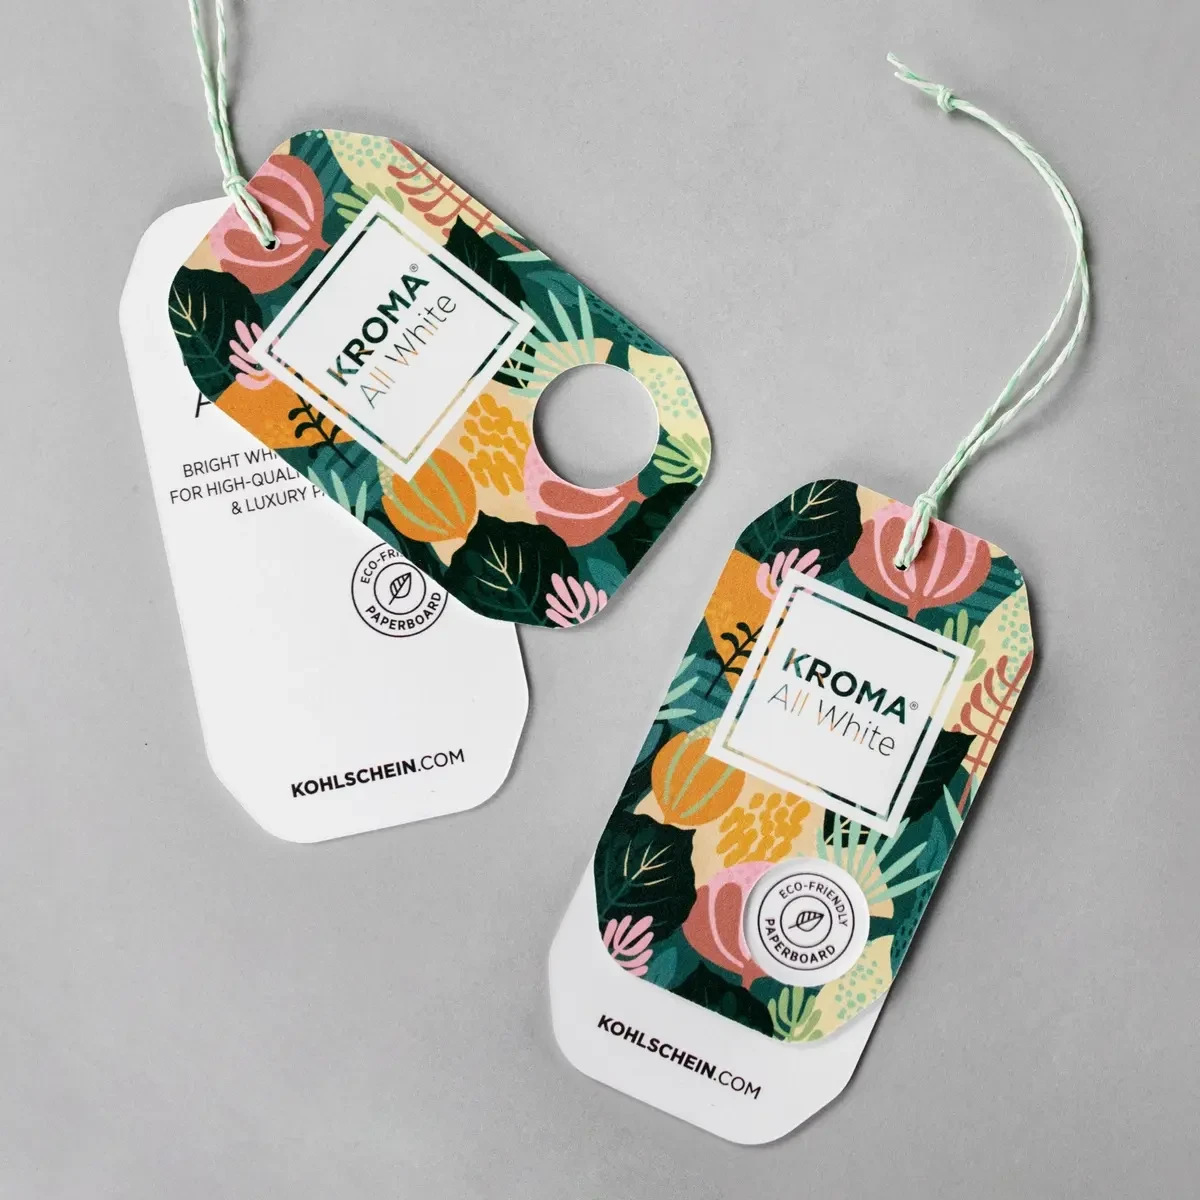 Hang tags made of KROMA All White